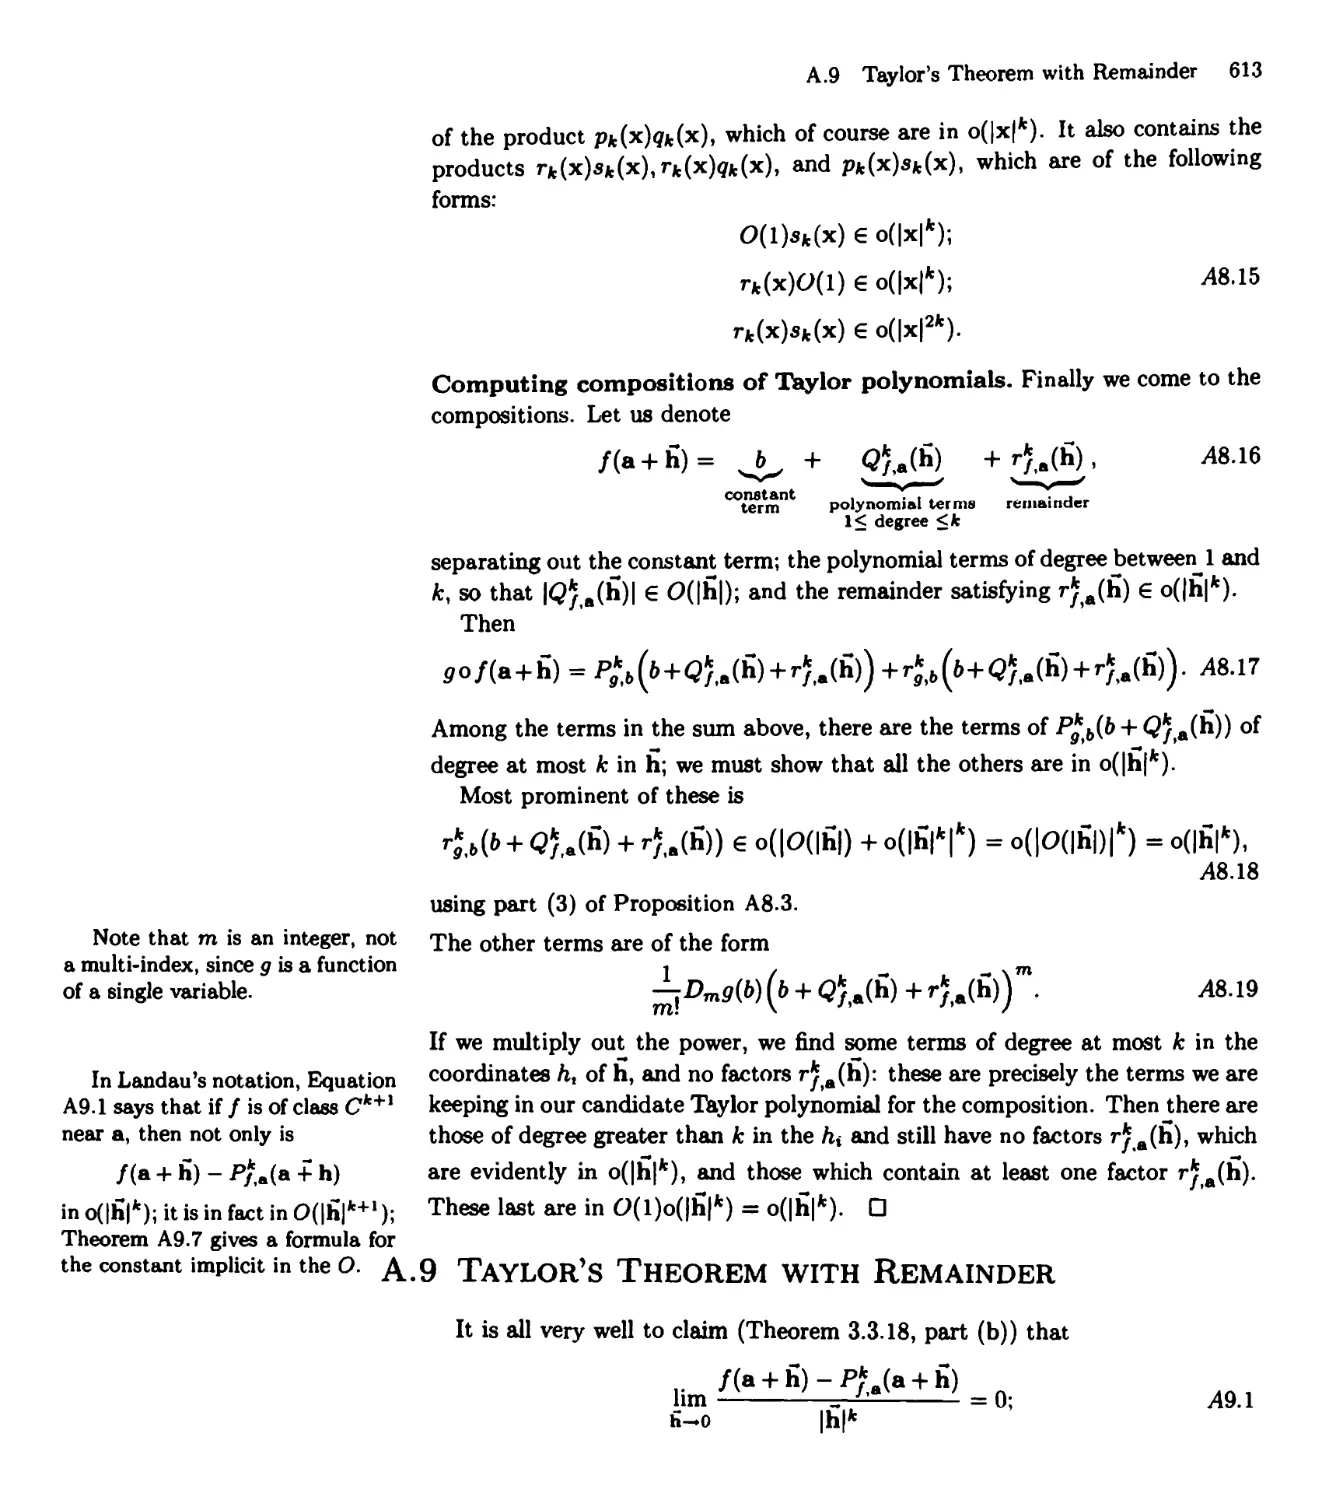 A.9 Taylor's Theorem with Remainder